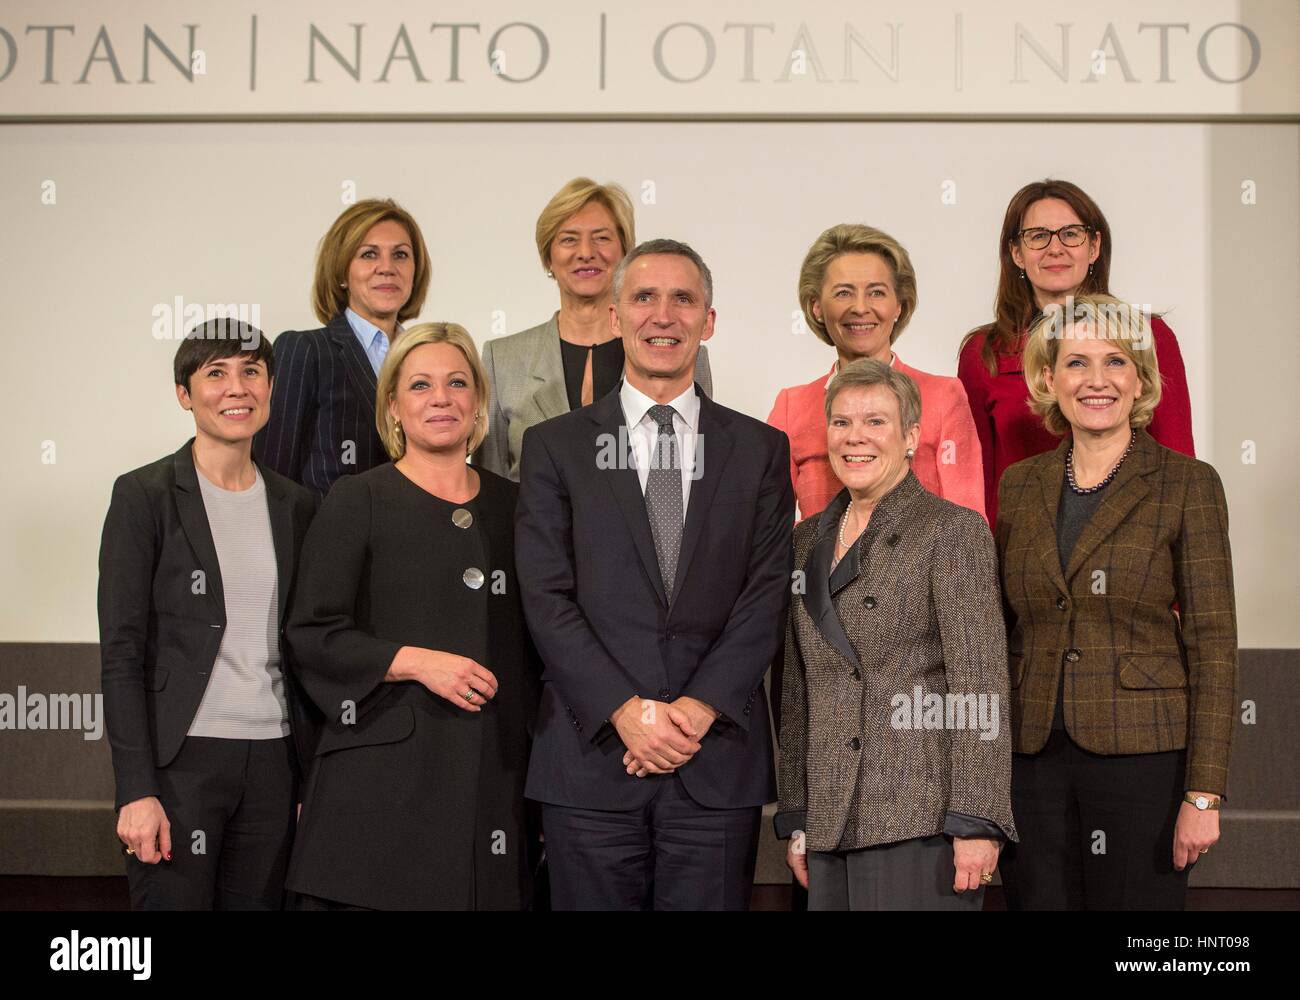 NATO Secretary General Jens Stoltenberg poses for a photo with female ministers of defense at NATO Headquarters February 15, 2017 in Brussels, Belgium. Members from left to right bottom are: Norwegian Minister of Defence Ine Eriksen Soreide, Netherland Minister for Defence Jeanine Hennis-Plasschaert, NATO Secretary general Jens Stoltenberg, Deputy Secretary General Rose Gottemoeller and Albanian Defense Minister Mimi Kodheli. Left to right back row: Spanish Minister of Defence Maria Dolores de Cospedal Garcia, Italy Minister of Defence Roberta Pinotti, German Minister of Defence Ursula Gertrud Stock Photo